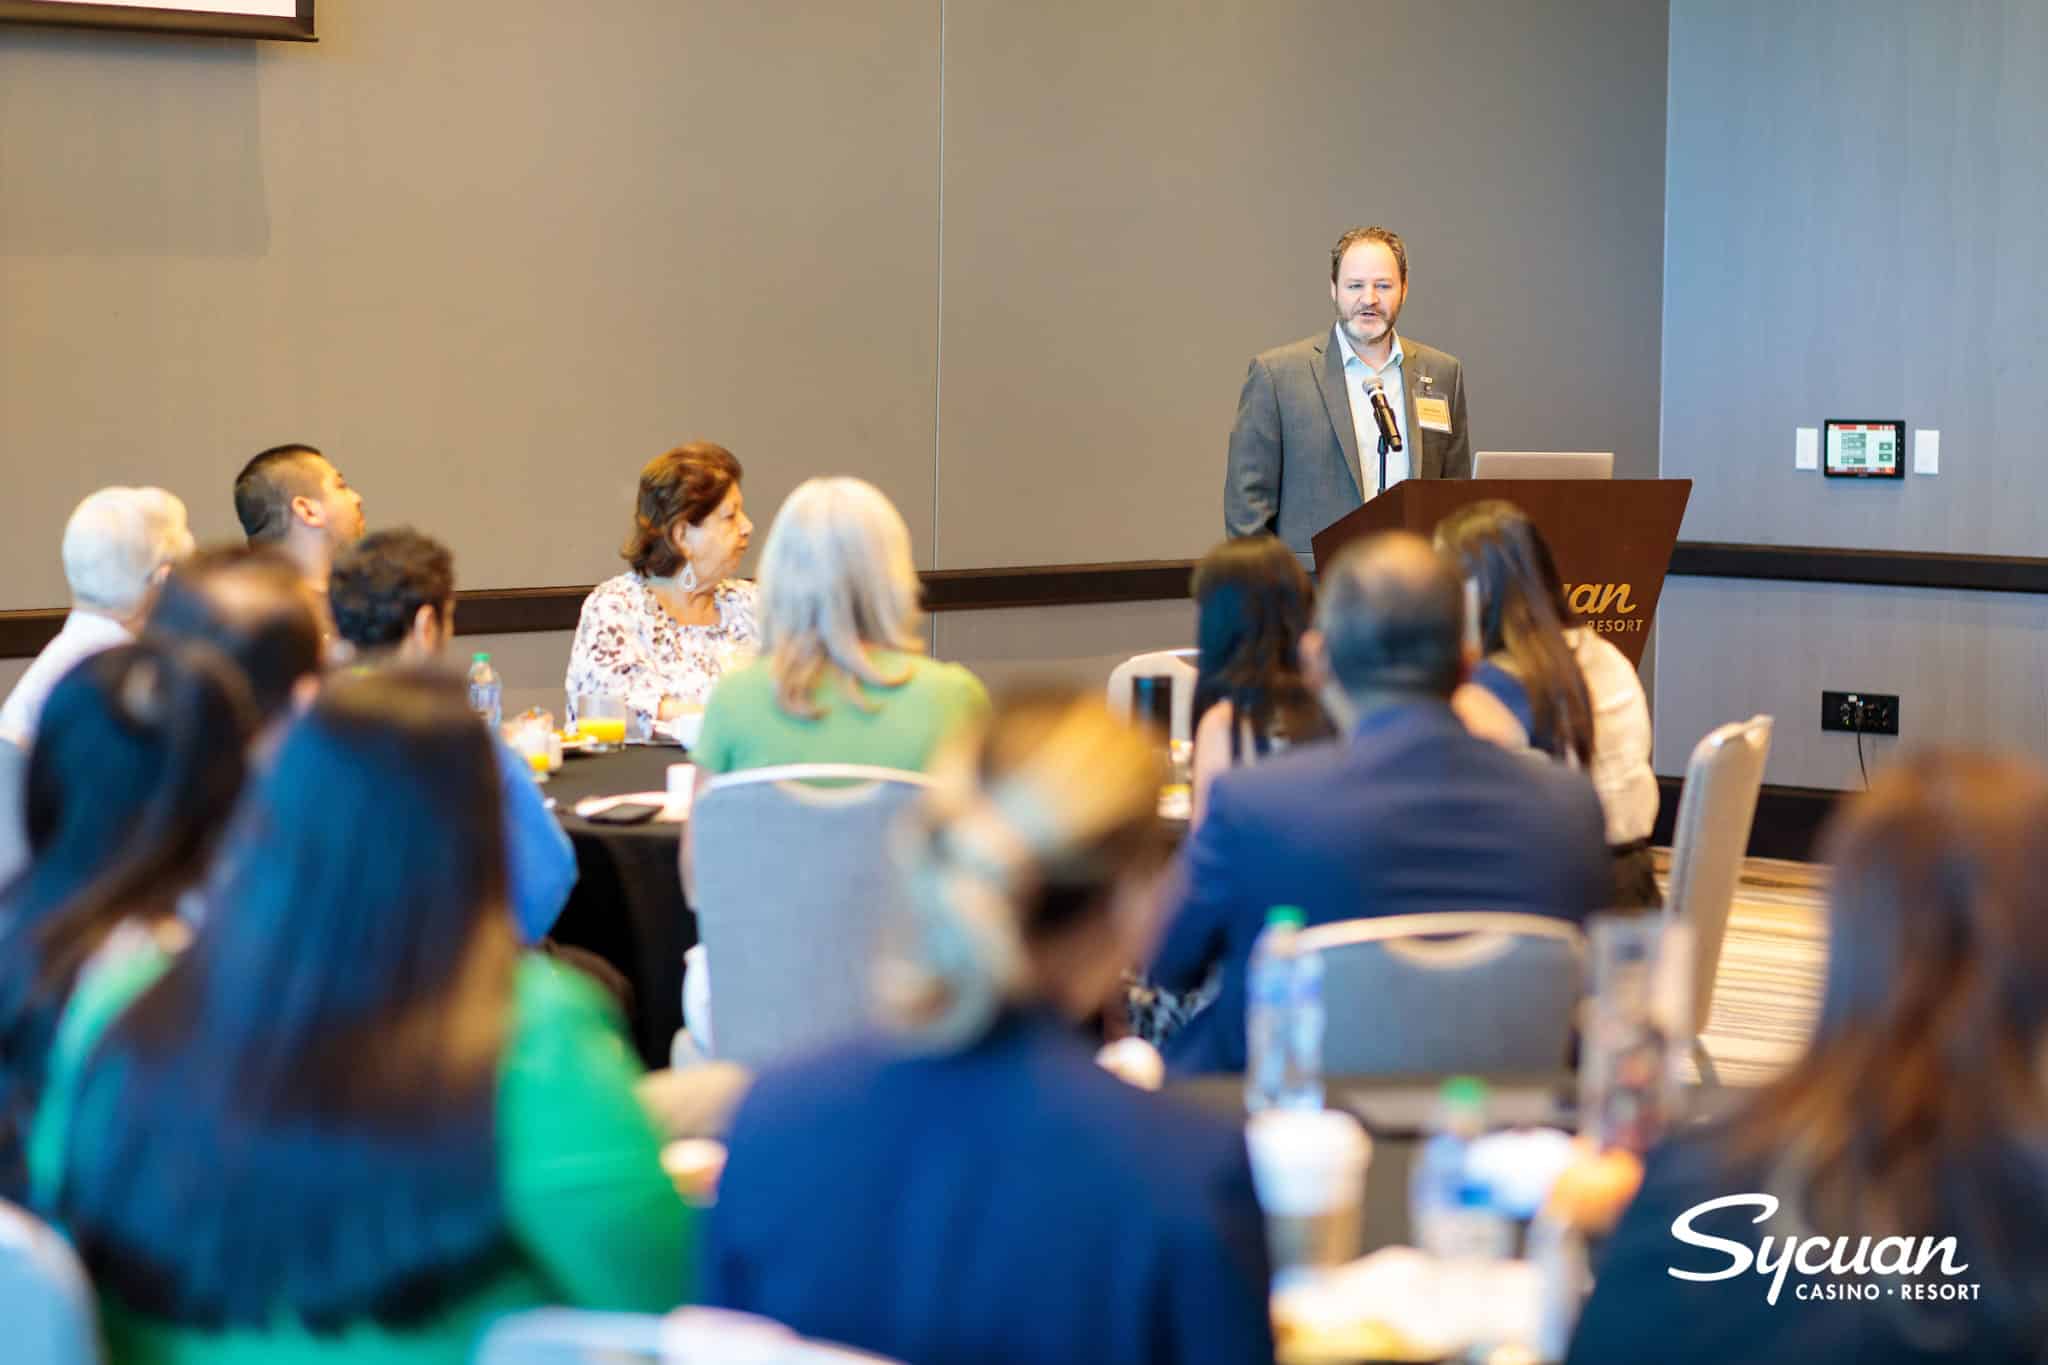 The Arc of San Diego's Chief Operations Officer Matt Mouer speaks on the significance on National Disability Employment Awareness Month and The Arc's partnership with Sycuan. (Chadd Cady / Sycuan Casino Resort)